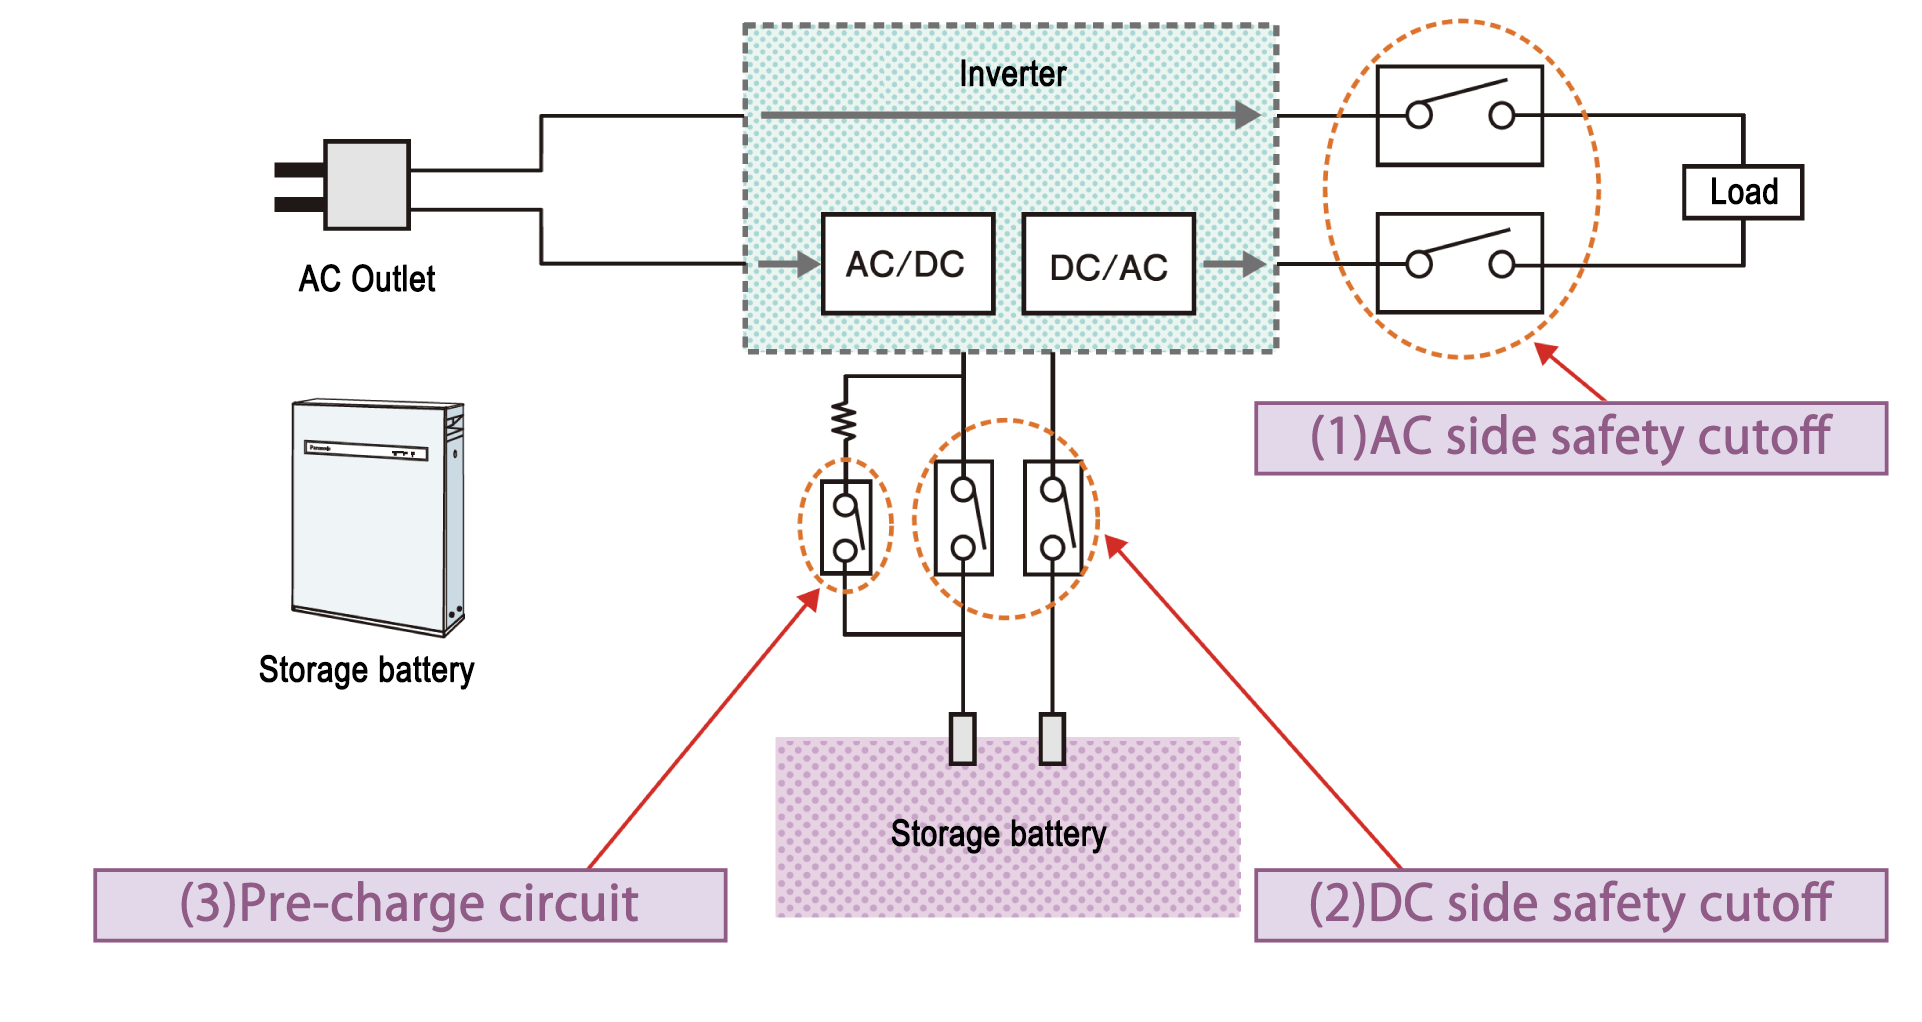 Illustration of a power storage system application example